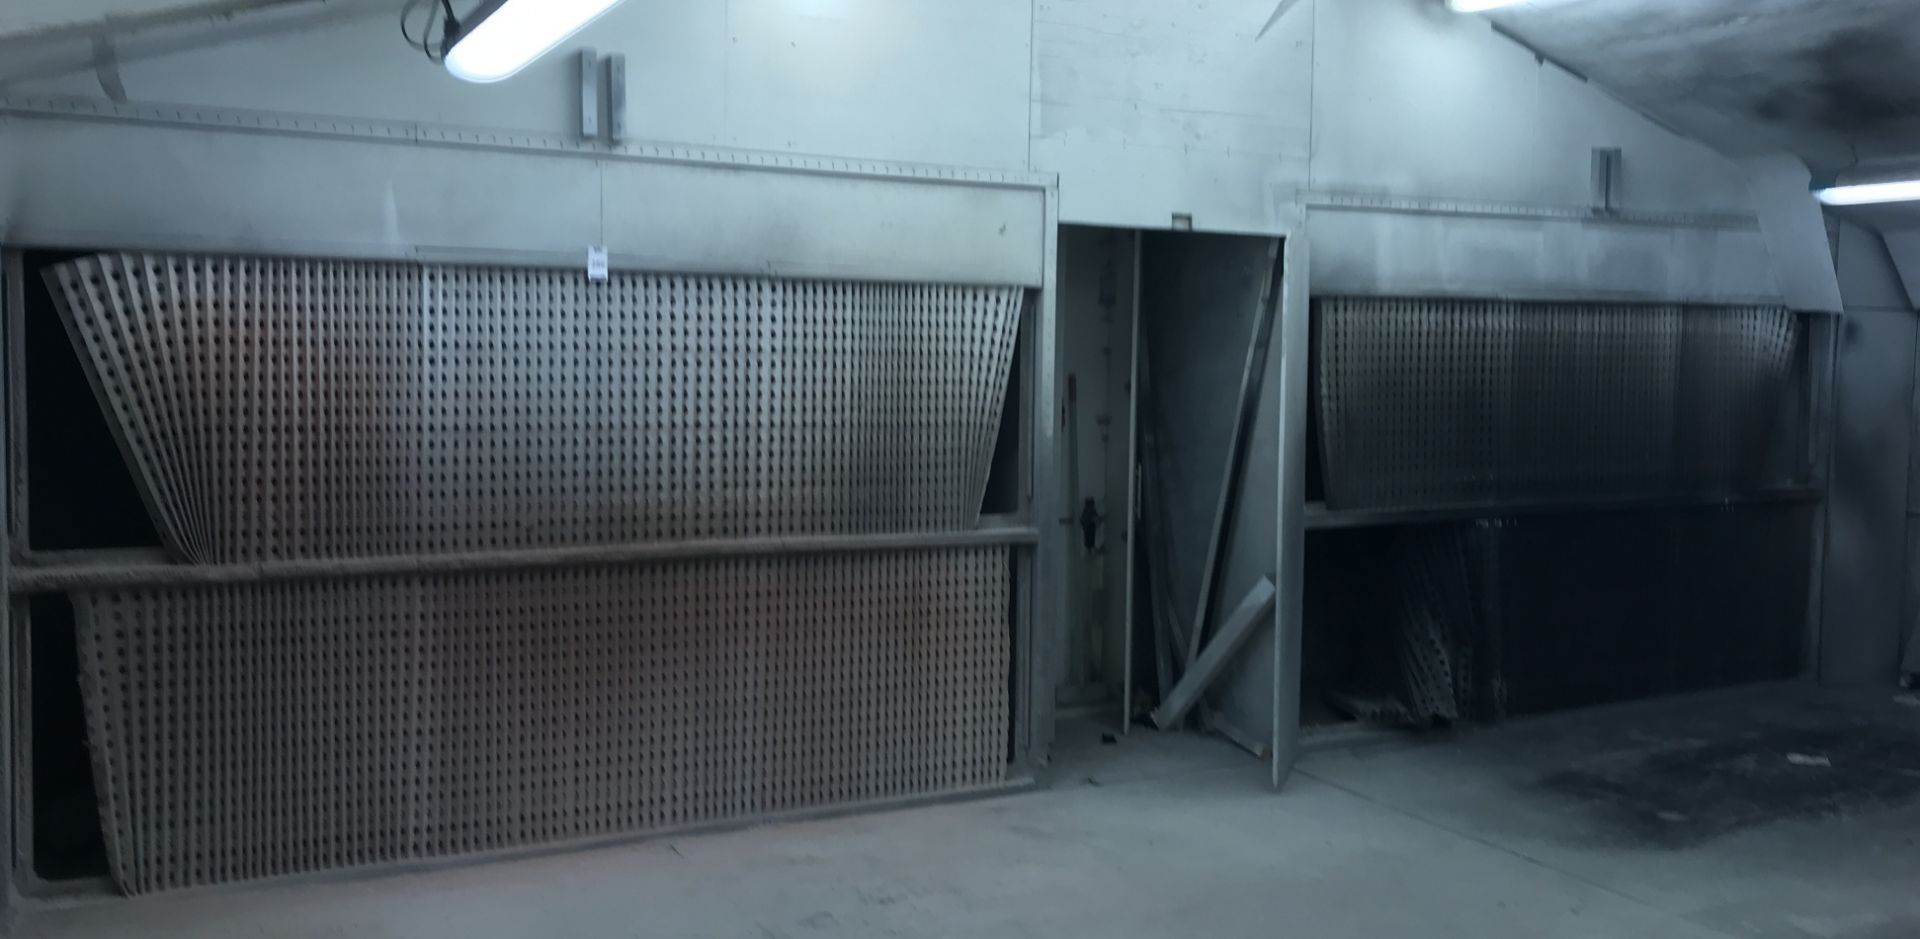 Twin Fercell Sectional Dryback Spray Booths (Purchaser to Dismantle - Must Provide RAMS, Copy of - Image 4 of 4